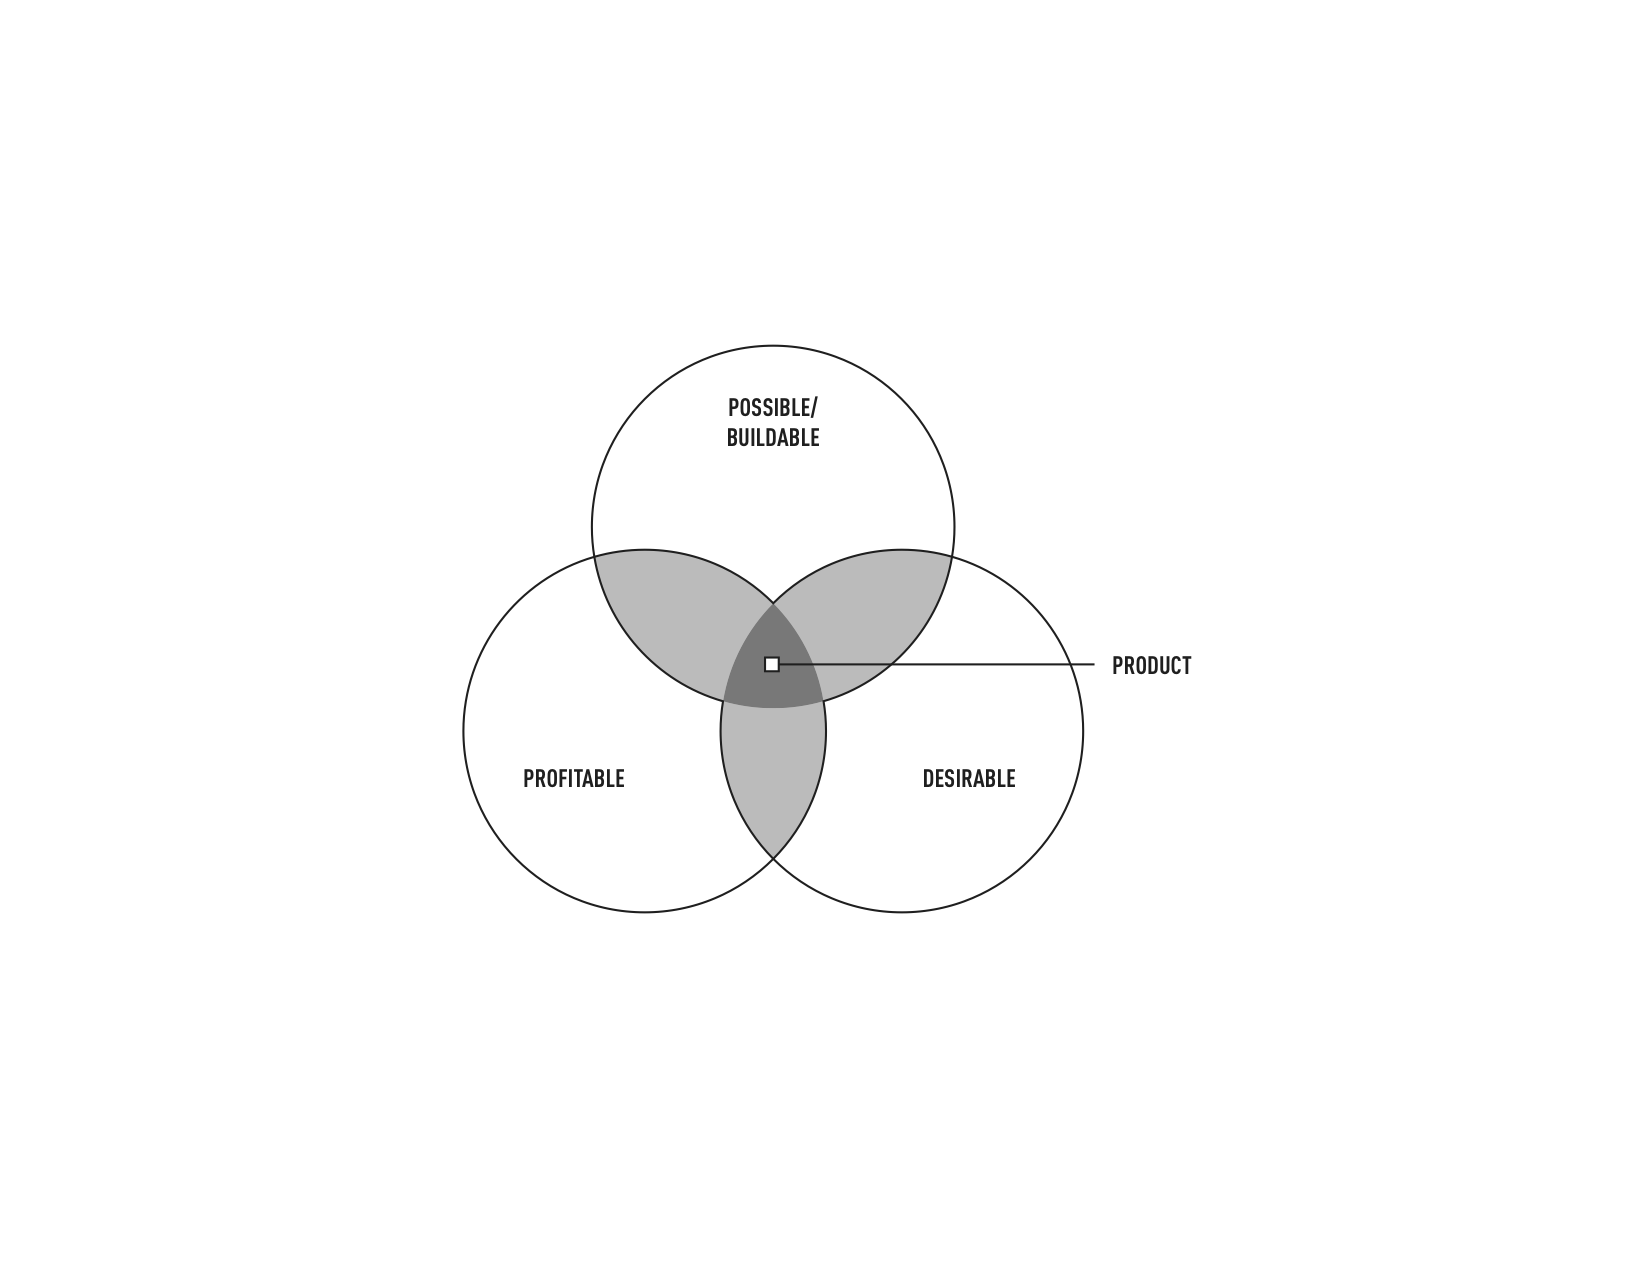 A venn diagrom showing that a product is the overlap of possible, profitable, and desireable